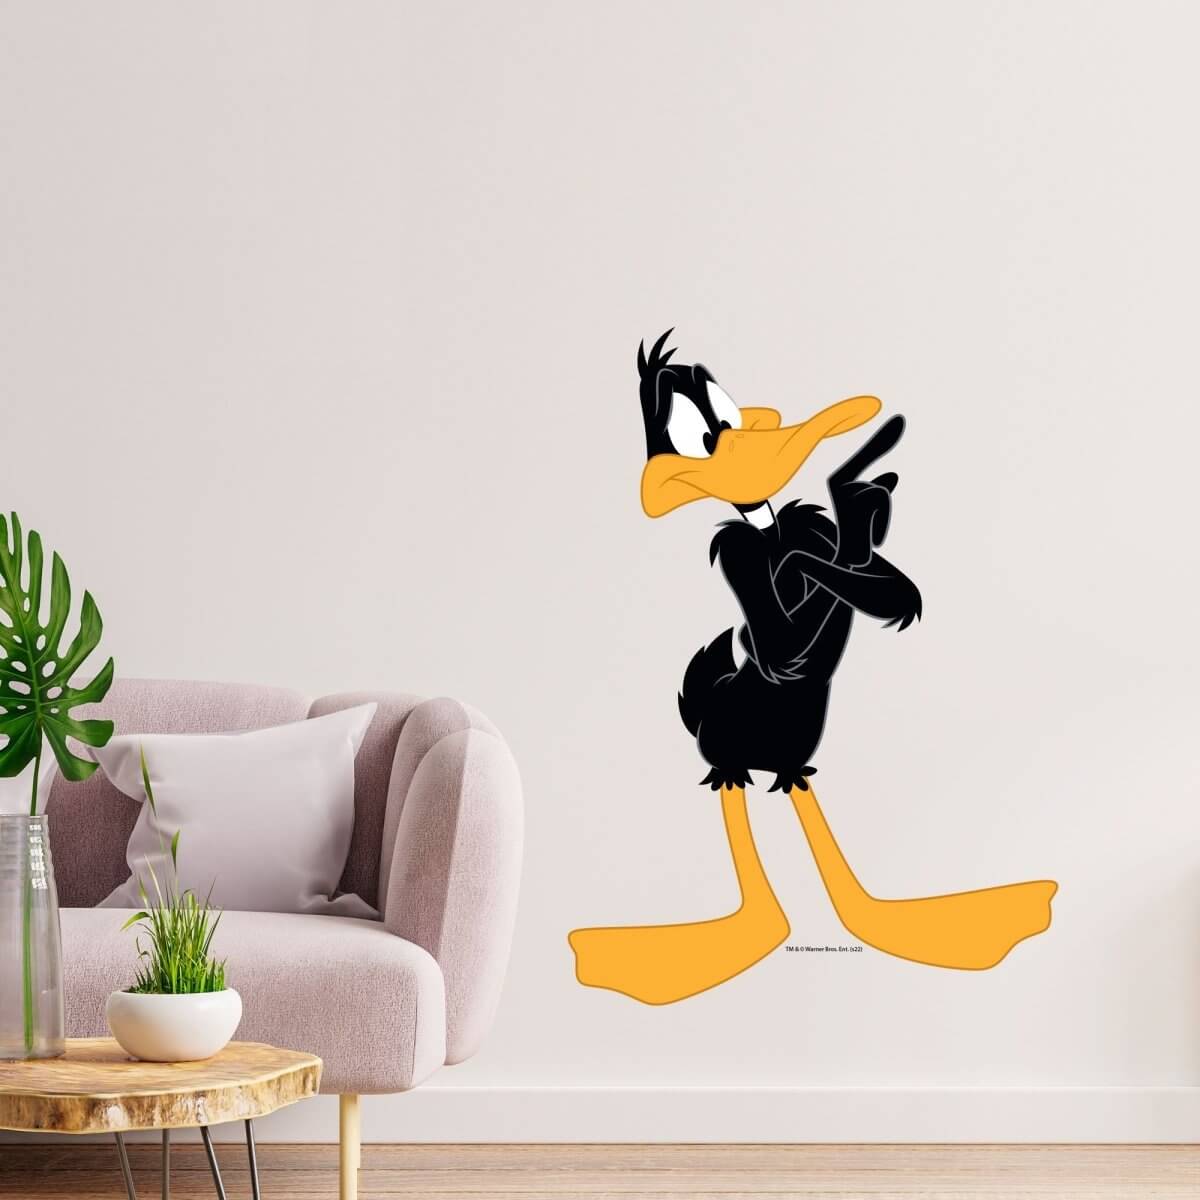 Kismet Decals Looney Tunes Daffy Duck in Thought Licensed Wall Sticker - Easy DIY Home & Kids Room Decor Wall Decal Art - Kismet Decals